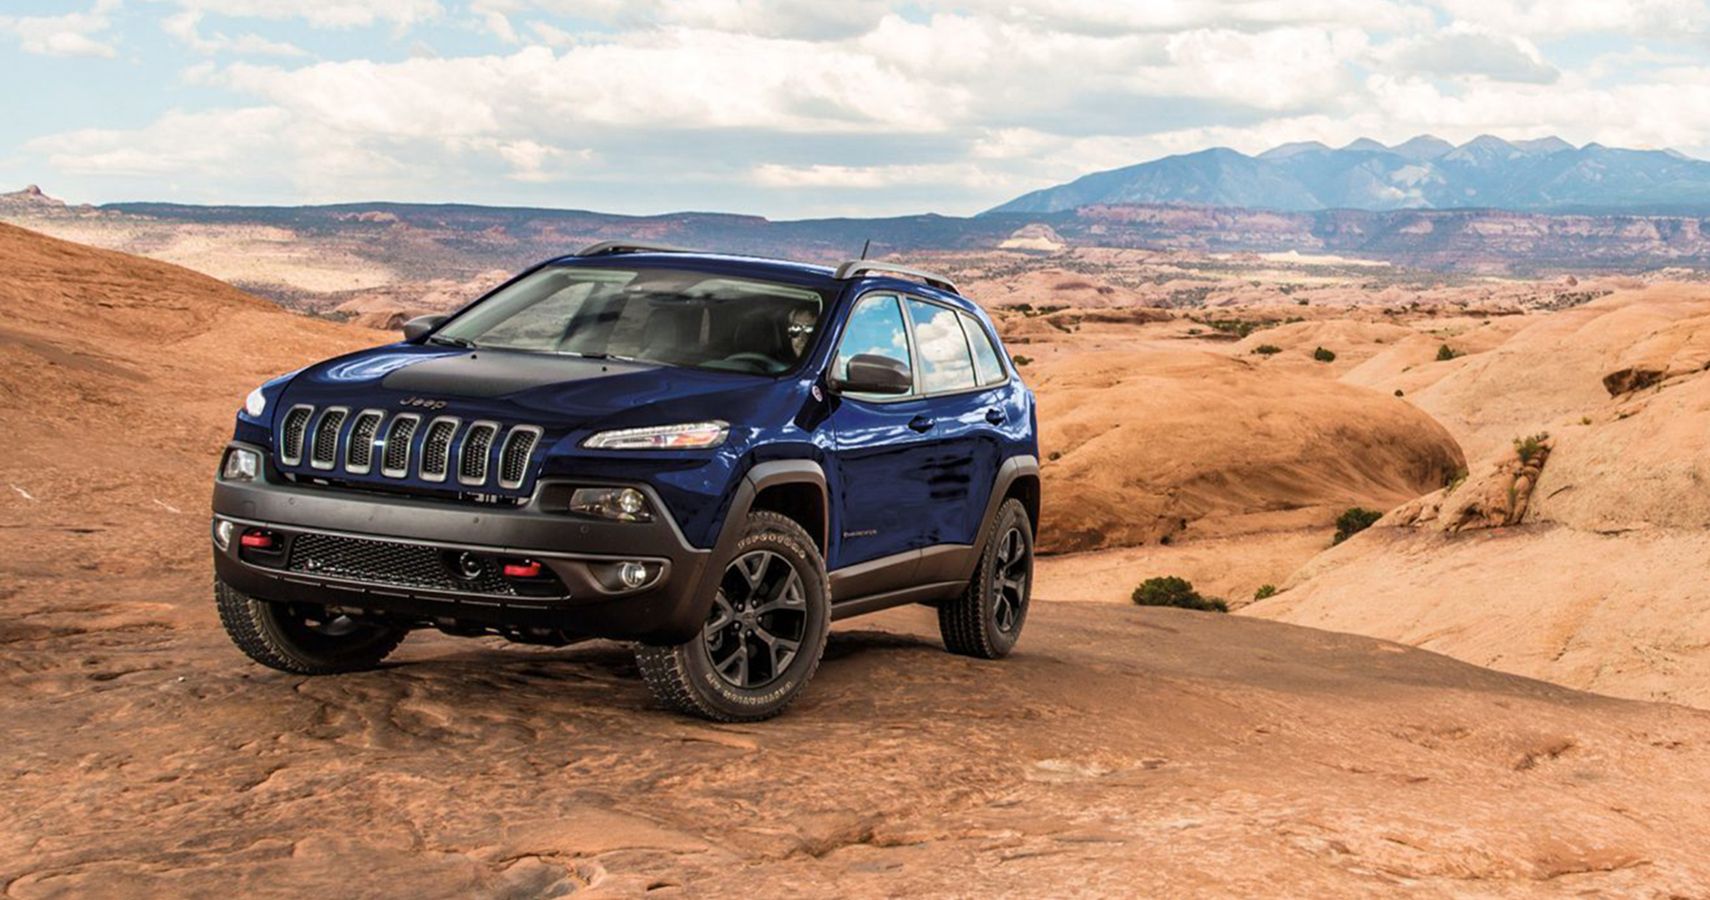 If You Are Looking For A Used Jeep Cherokee, It’s The 2018 Model That Judged To Be The Best